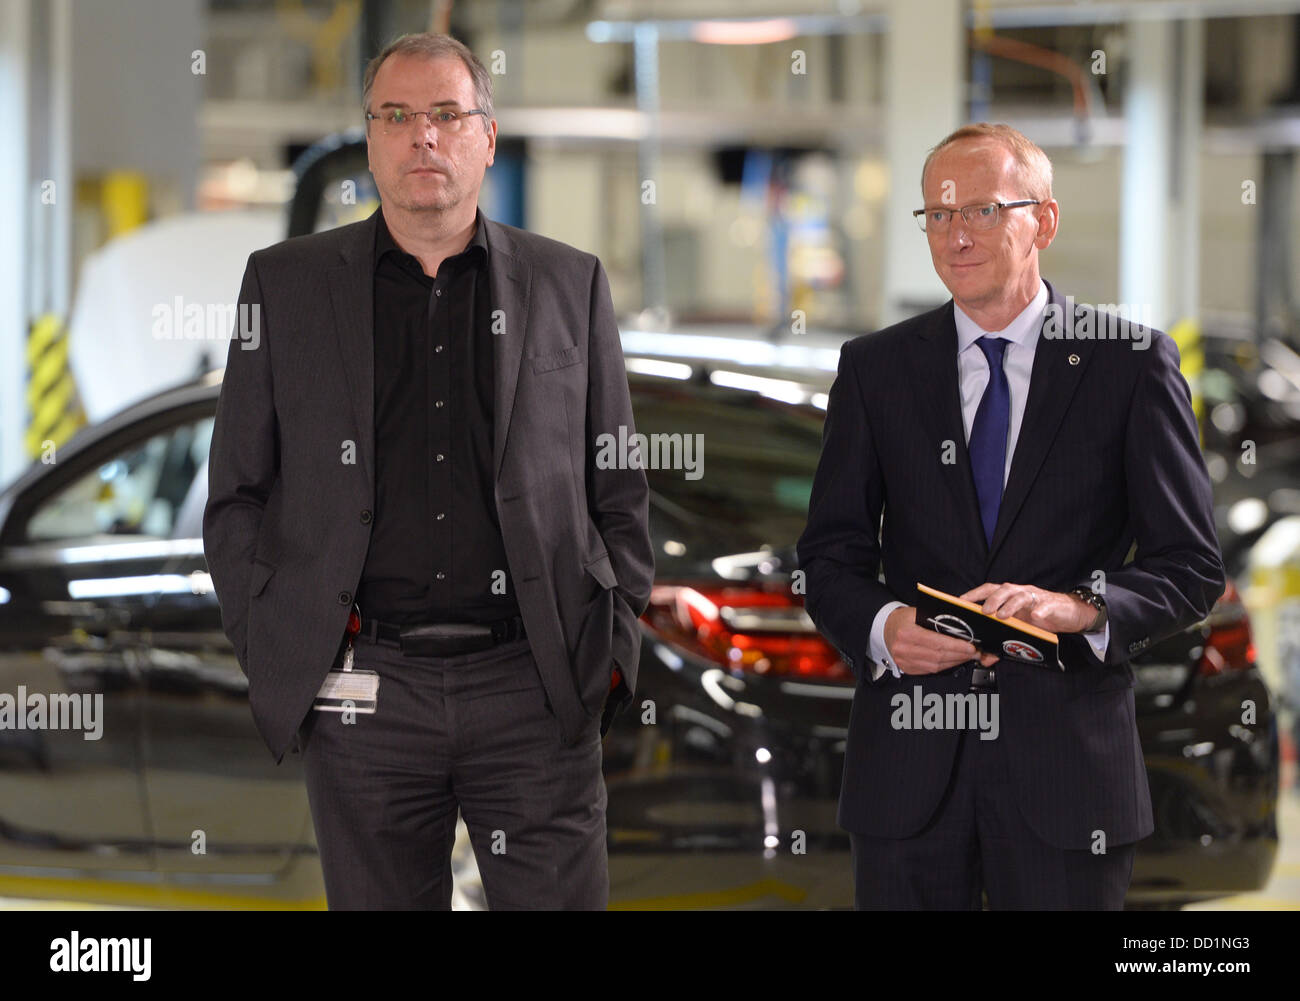 Ruesselsheim, Germany. 22nd Aug, 2013. Karl-Thomas Neumann (R), chairman of the Adam Opel AG, and Wolfgang Schäfer-Klug, the employee organization head look around during the presentation of the new Opel Insignia in the Opel parent plant in Ruesselsheim, Germany, 22 August 2013. The car builder overhauled its almost five-year-old flagship car. Photo: ARNE DEDERT/dpa/Alamy Live News Stock Photo